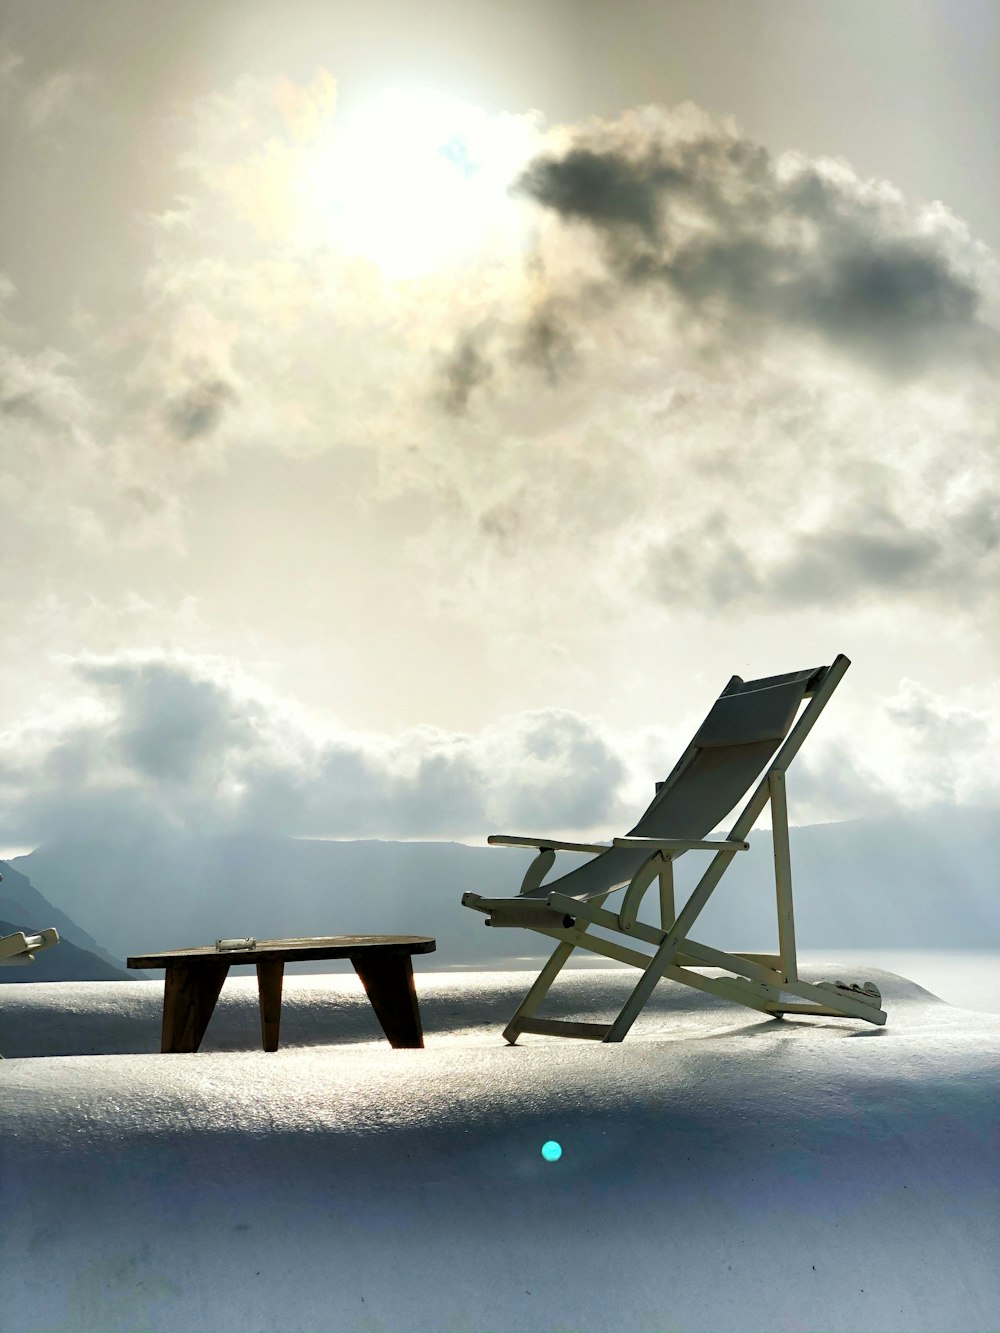 brown wooden folding chair on snow covered ground under white clouds during daytime